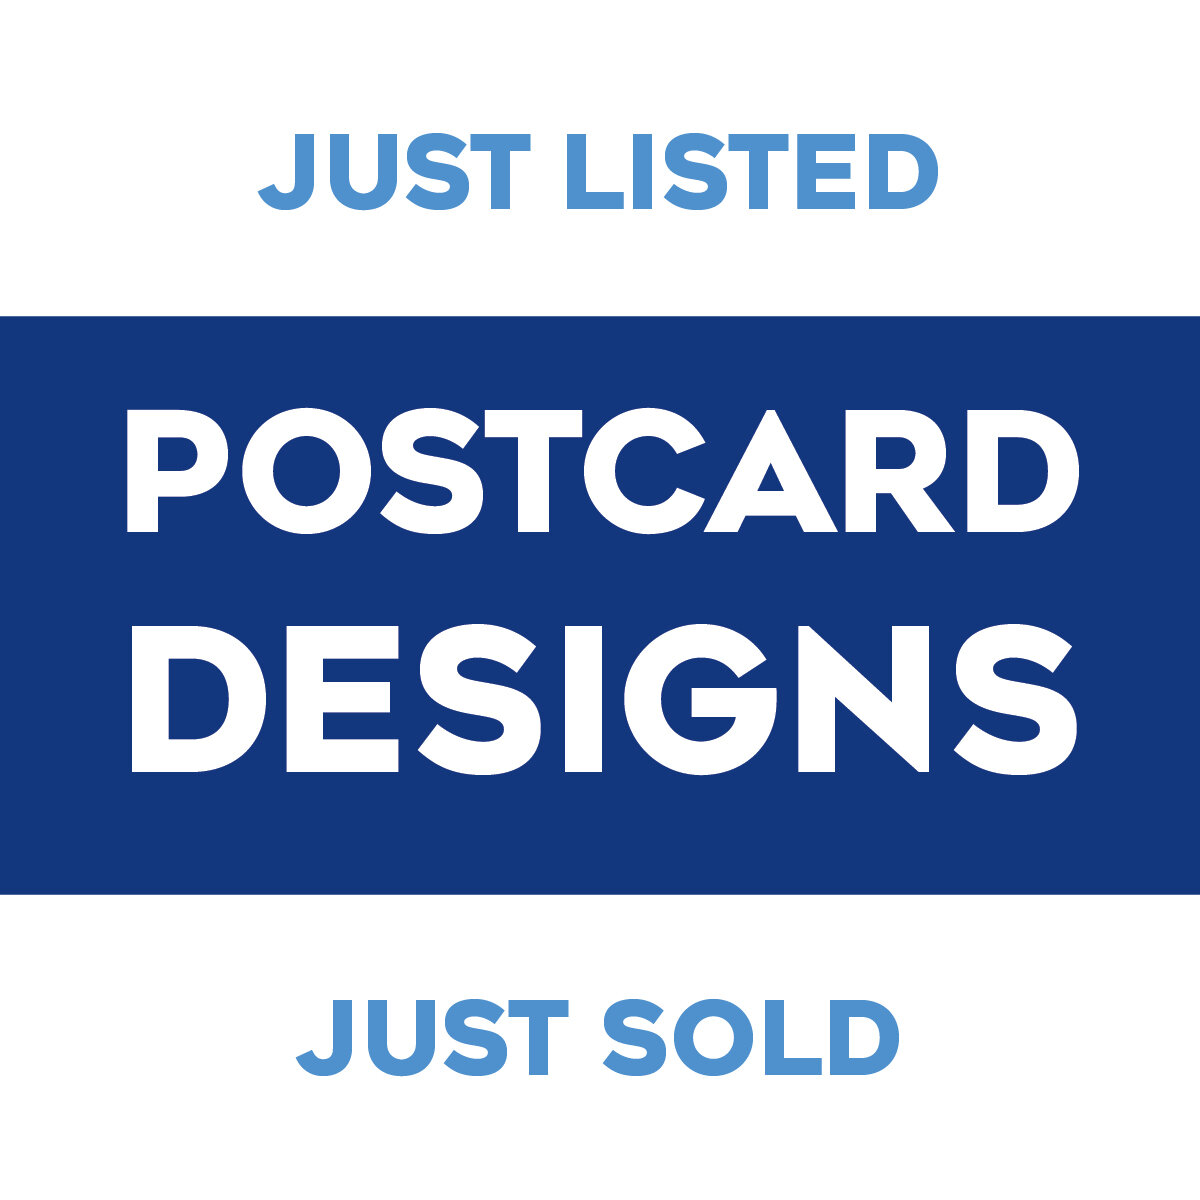 Just Listed/Sold Postcards